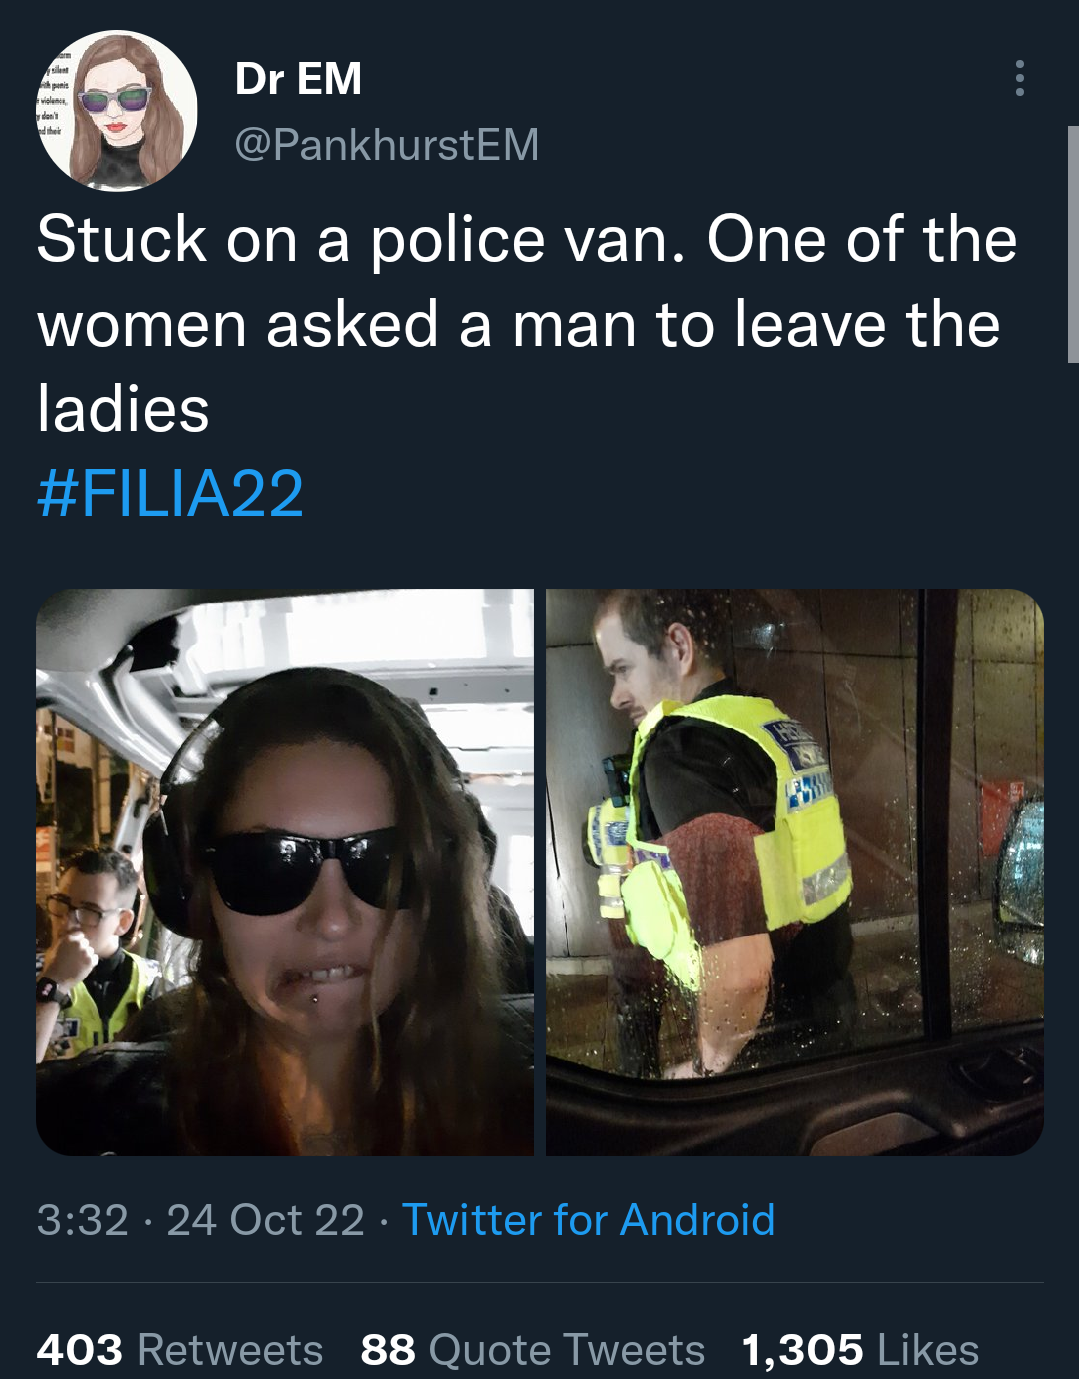 Tweet by EM Pankhurst. Text reads 'Stuck on a police van. One of the women asked a man to leave the ladies', attached are two pictures, one of a white woman with dark blonde hair in black sunglasses sitting in a vehicle with a white police officer with short dark hair and glasses stood behind her, the other of another white police officer with dark hair taken through the window of a vehicle